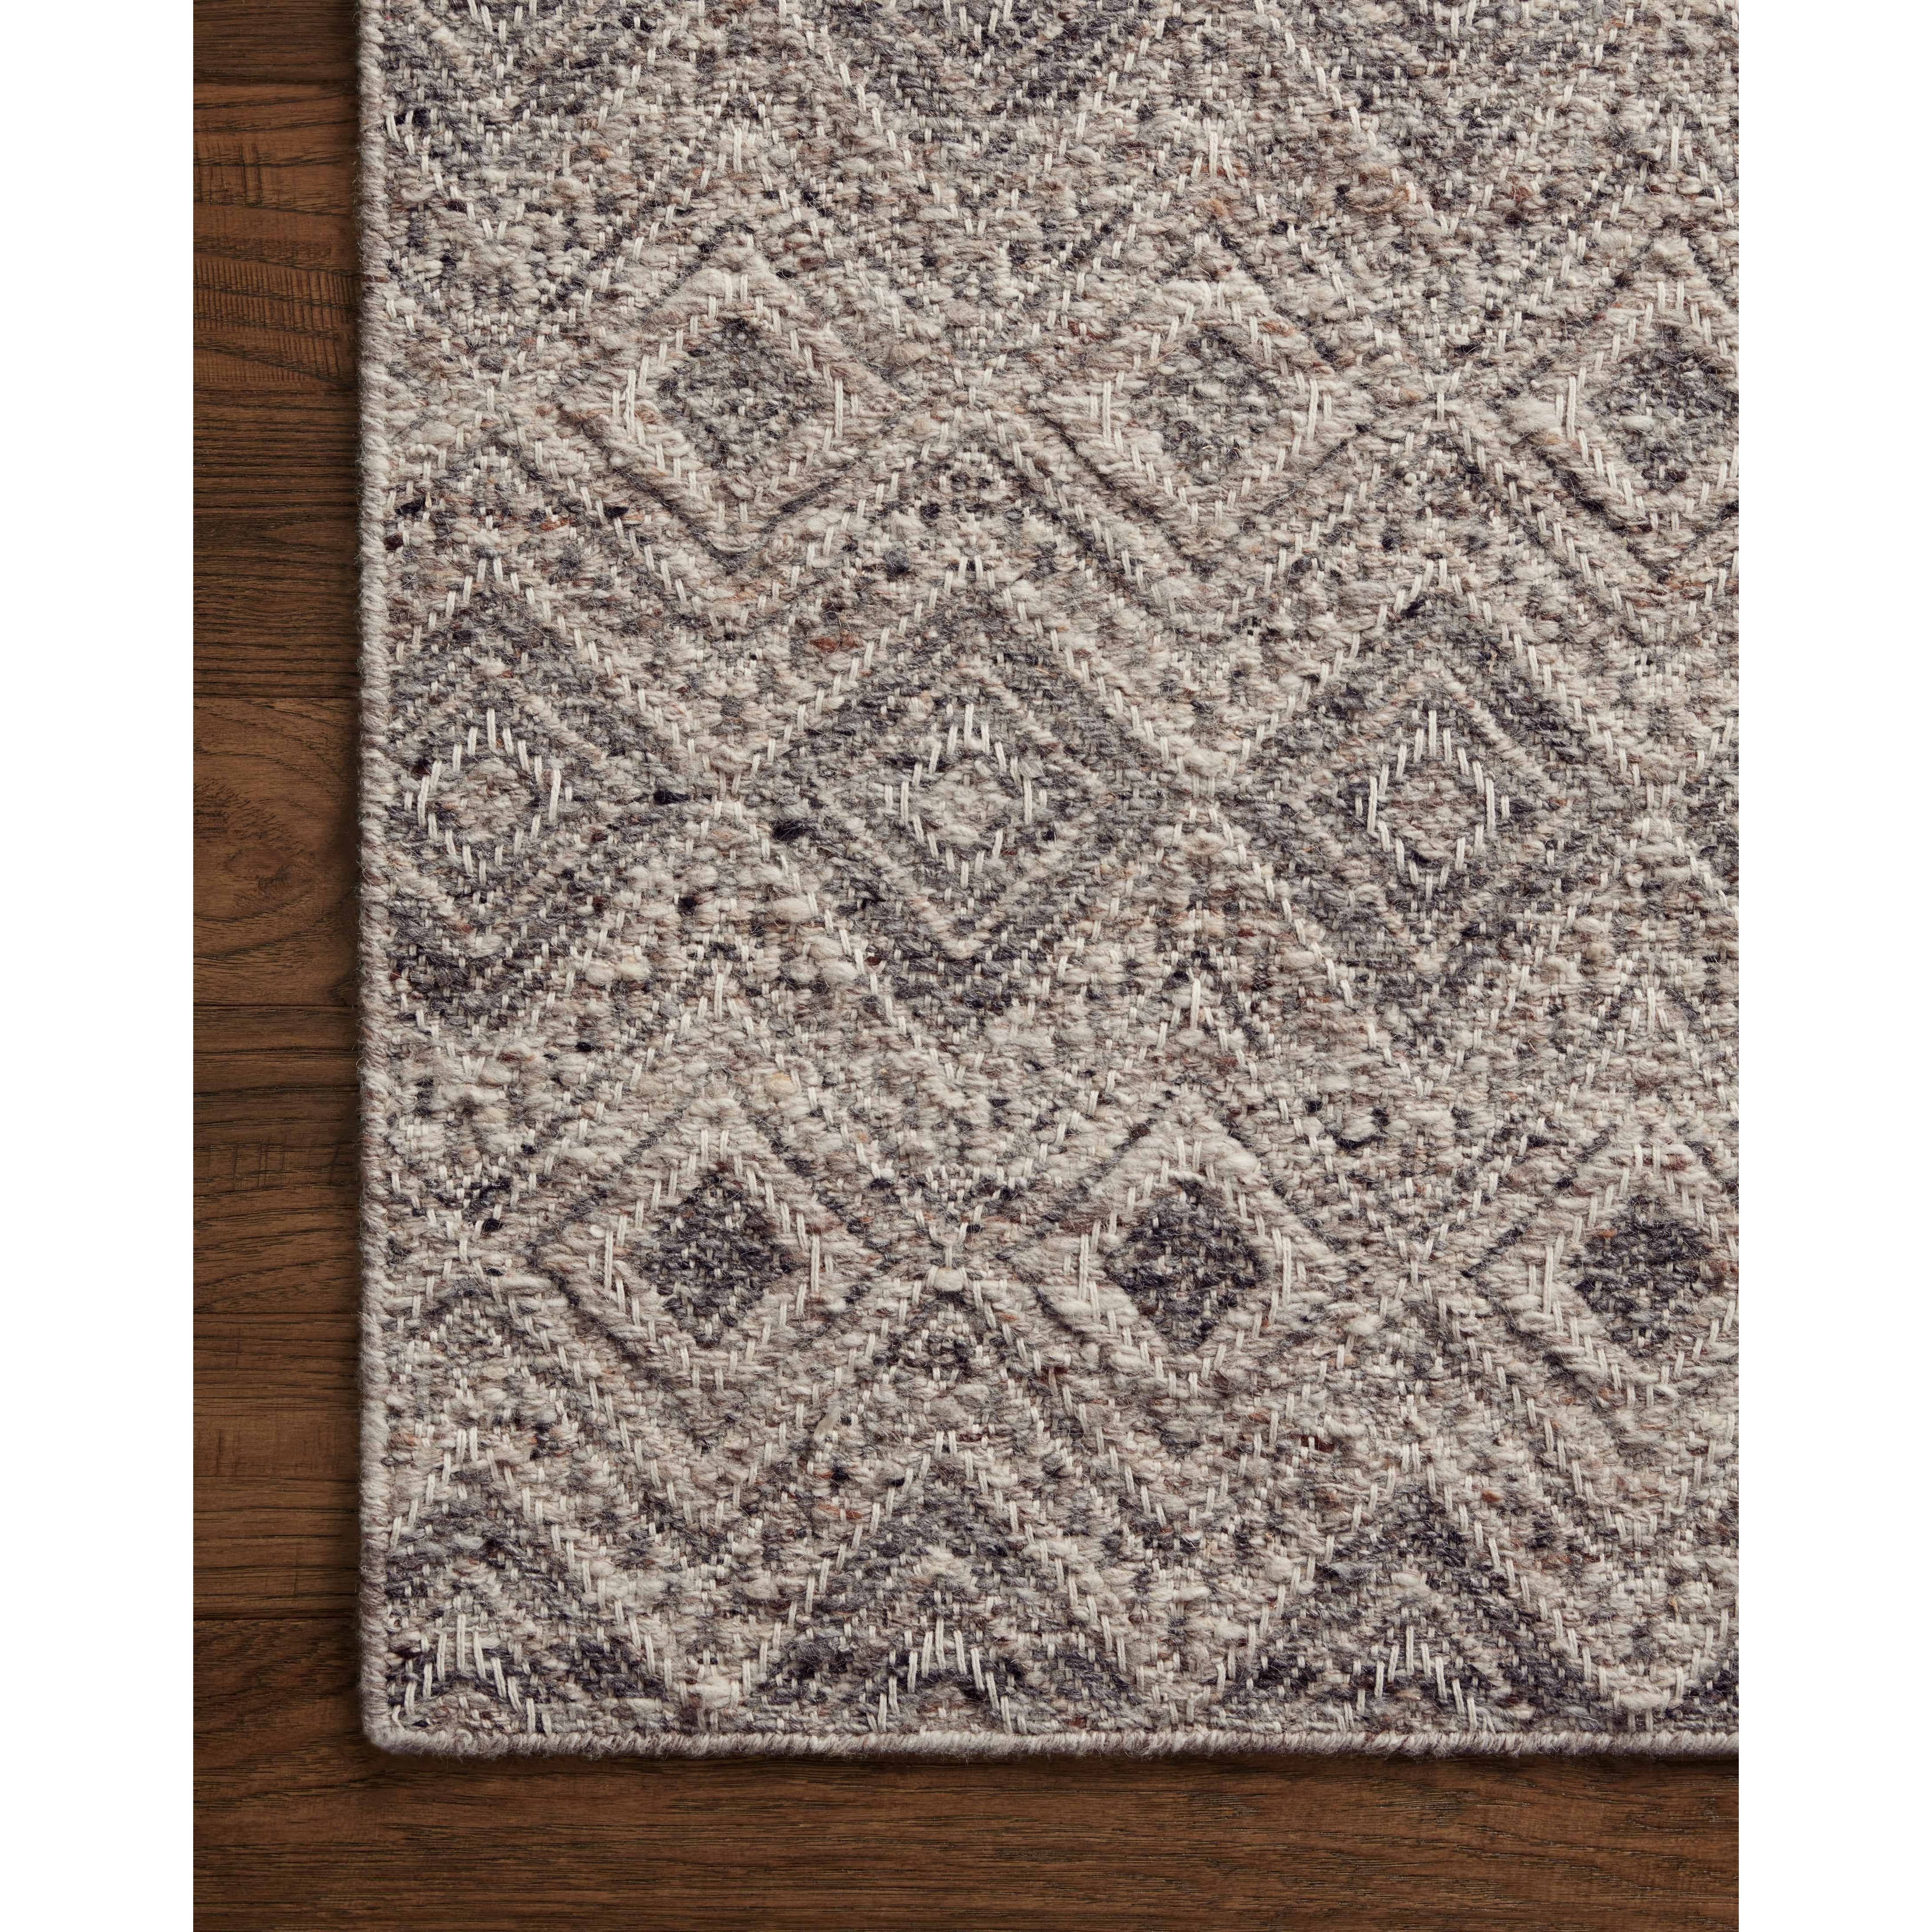 The Raven Taupe / Grey Rug is intricately handwoven with delicate, fine yarns that amplify the rug's layered and dimensional geometric design. While the rug itself is thick and sturdy, the colors and patterns have a casual lightness that can work in many spaces, from busy living rooms to serene bedrooms. Amethyst Home provides interior design, new construction, custom furniture, and area rugs in the Alpharetta metro area.